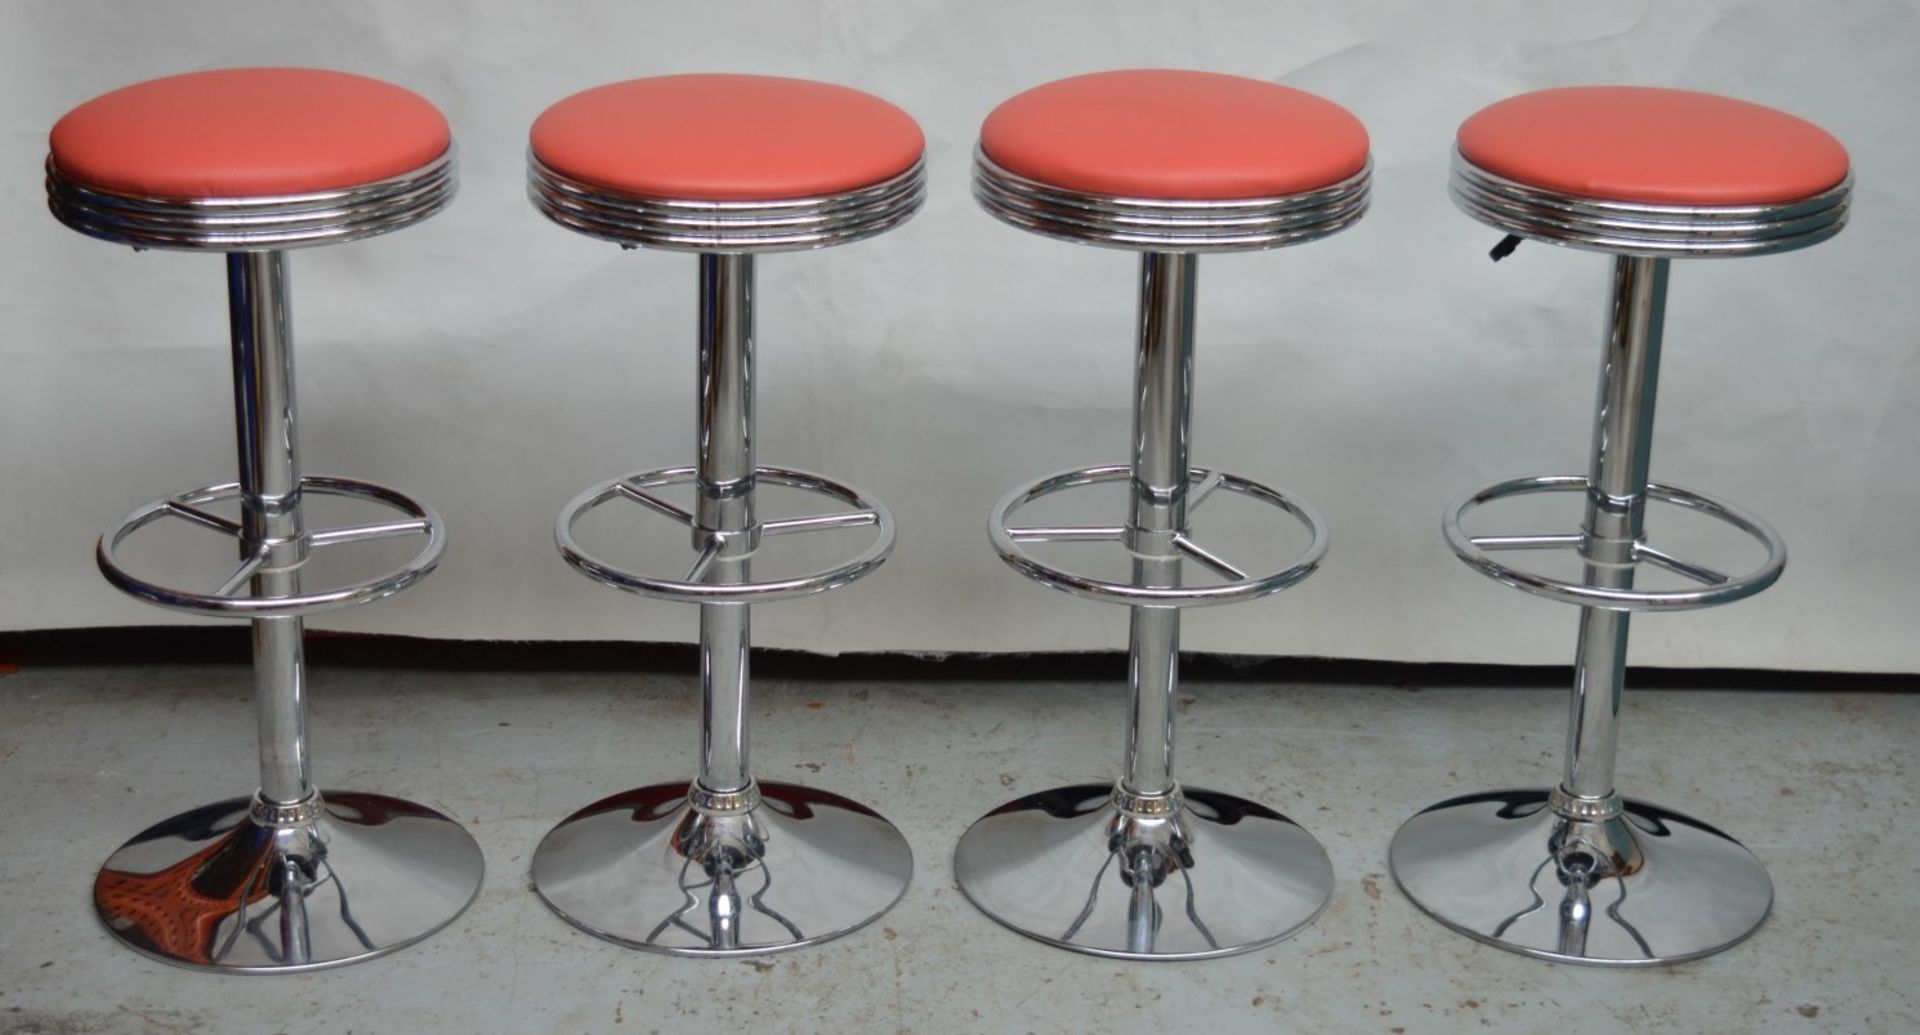 4 x Retro American Roadside Diner Themed Gas Lift Bar Stools - CL164 - Fantastic Stools With Full - Image 9 of 14